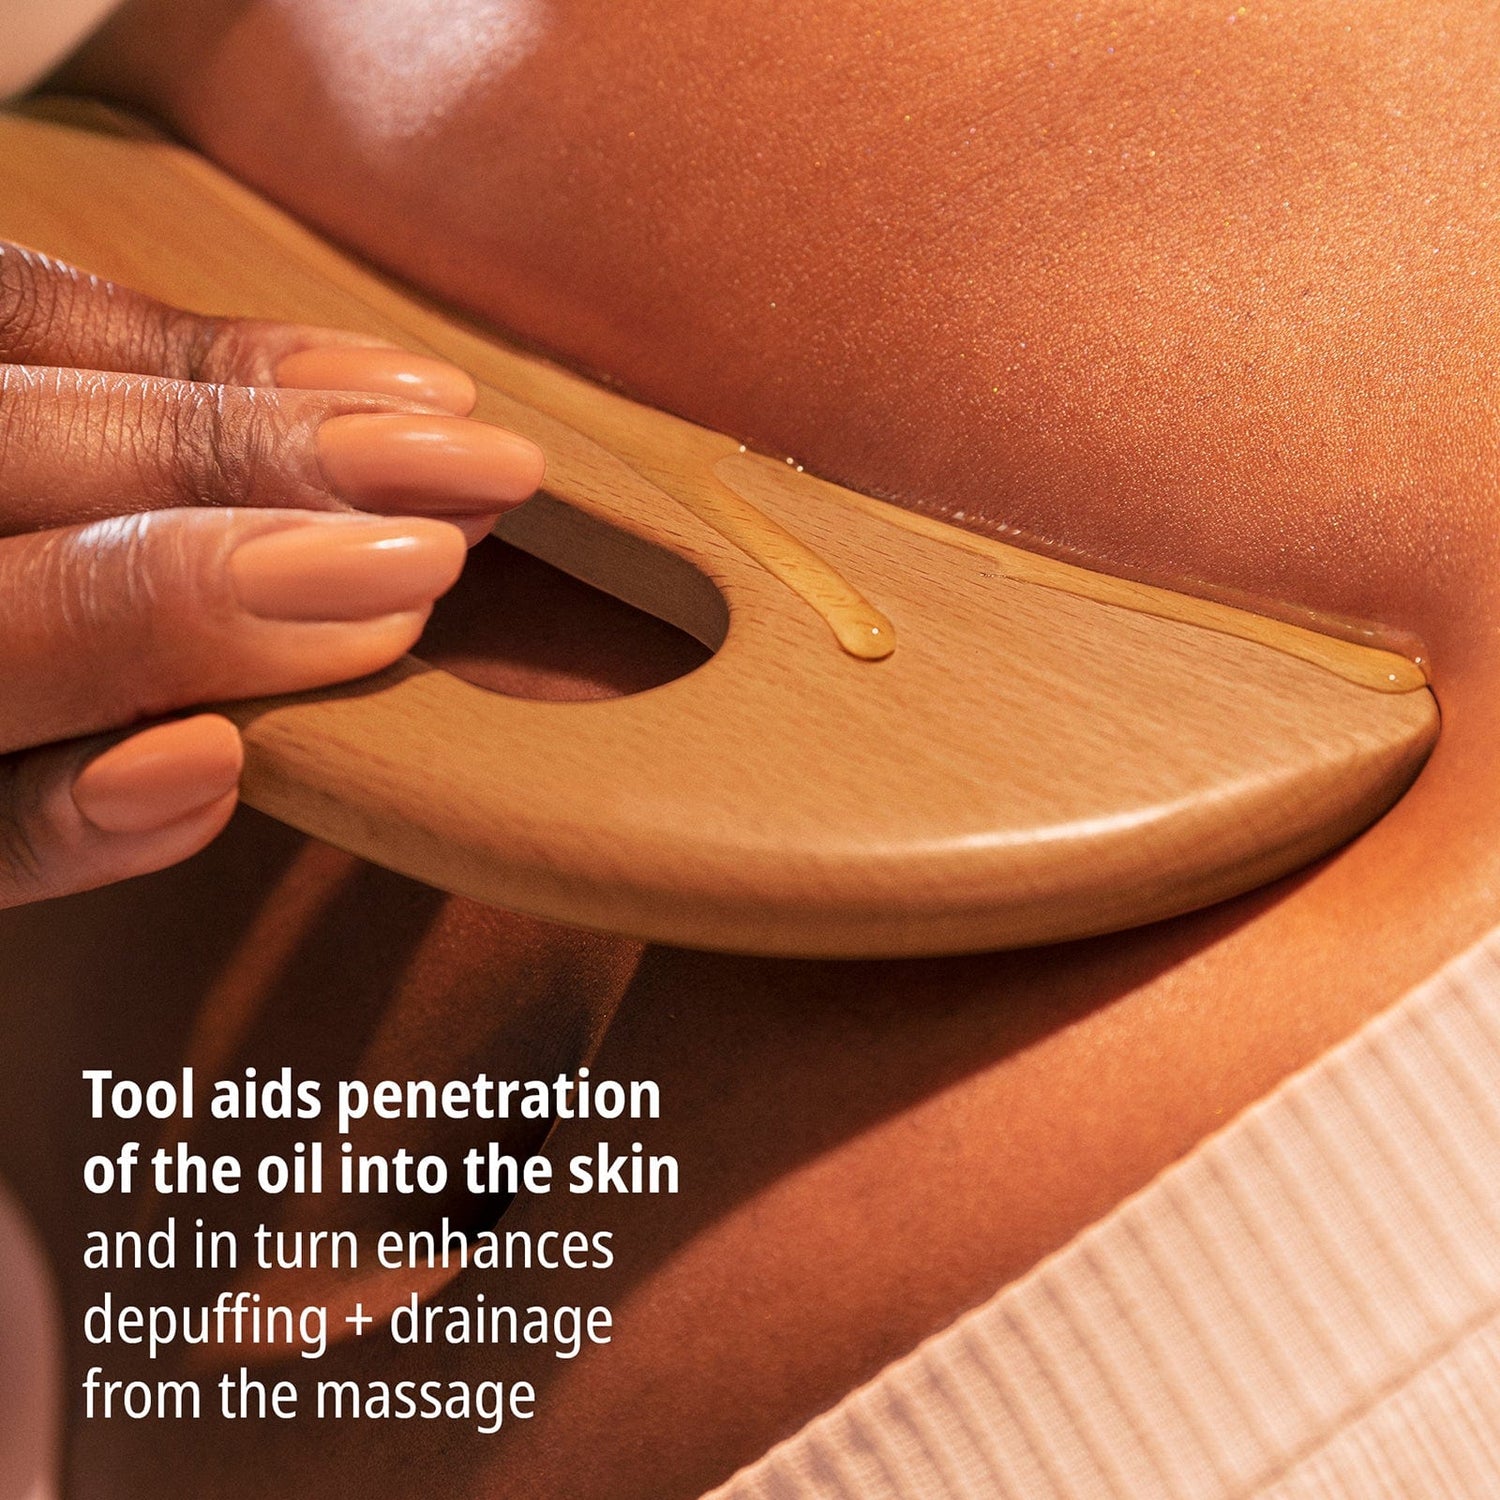 Tool aids penetration of the oil into the skin and in turn enhances depuffing + drainage from the massage